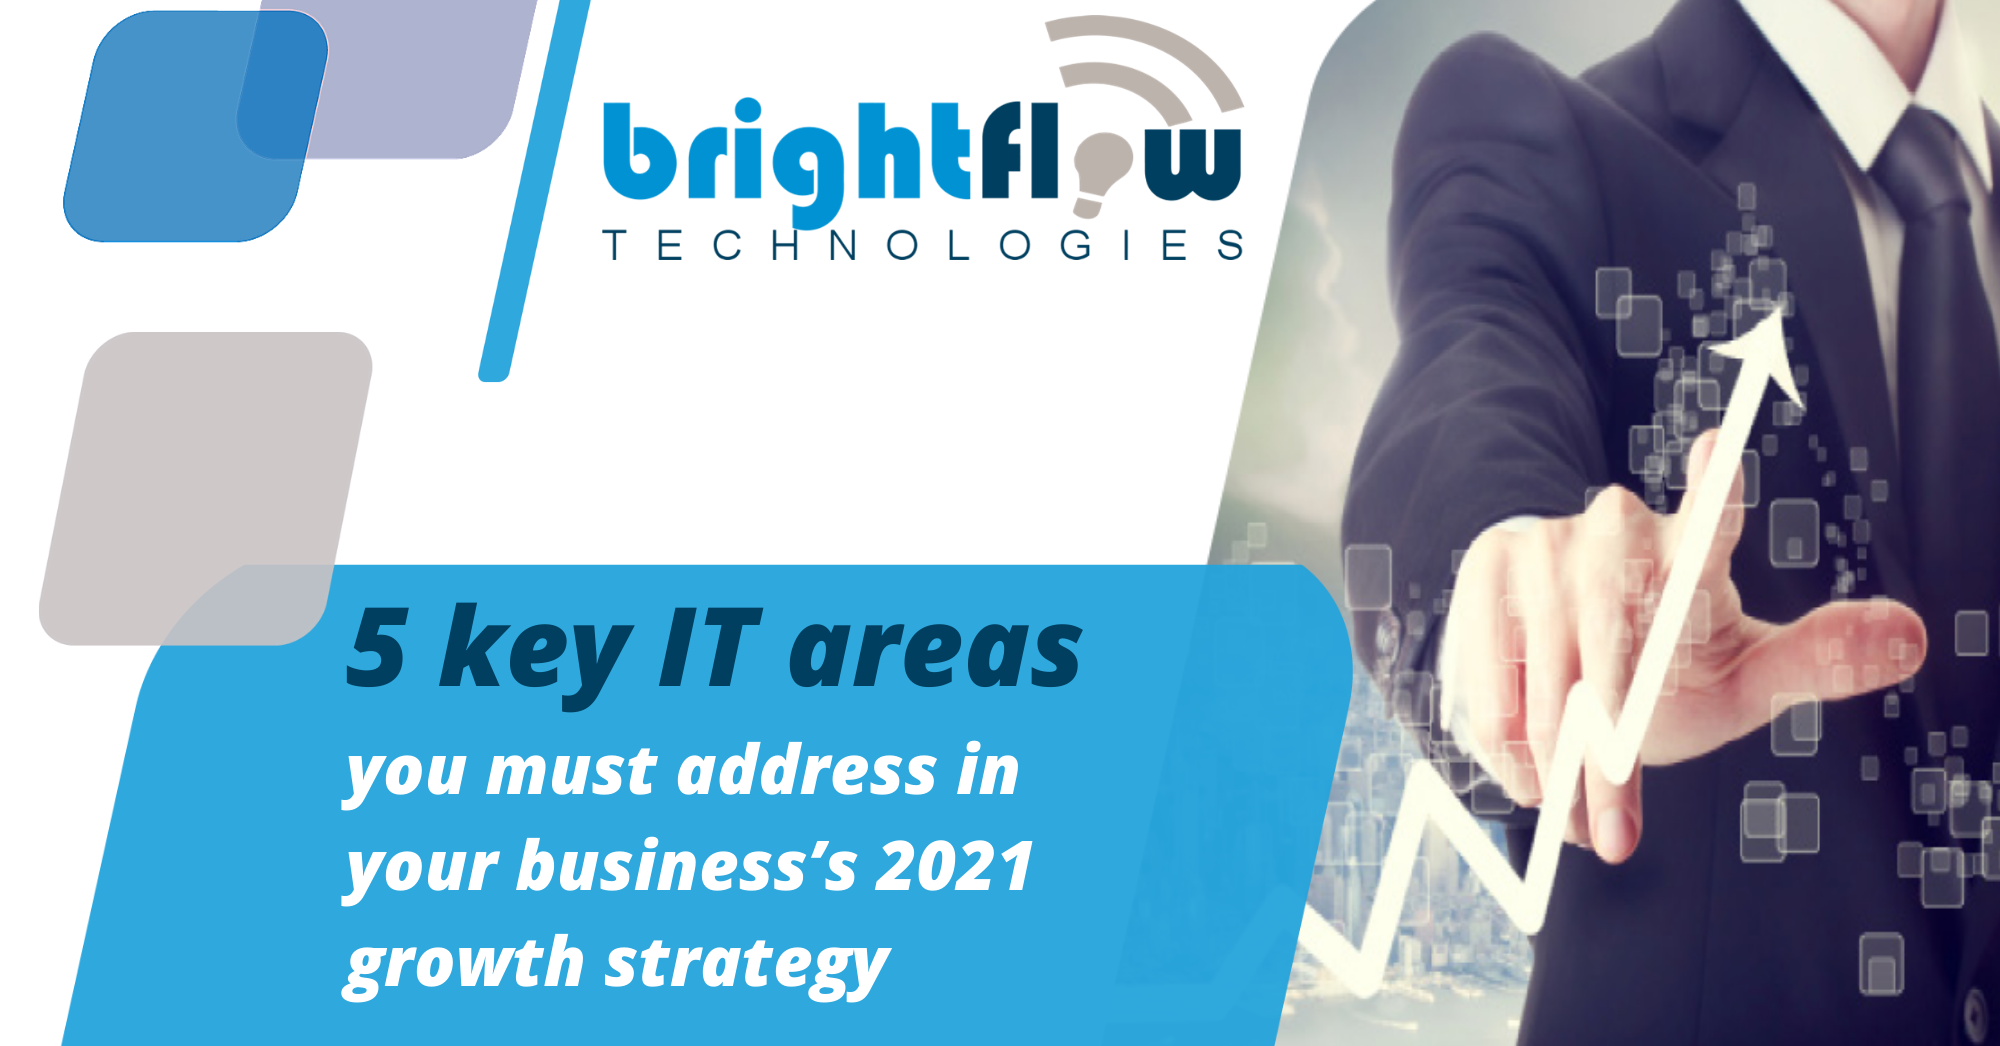 Five Key IT areas you must address in your business’s 2021 growth strategy